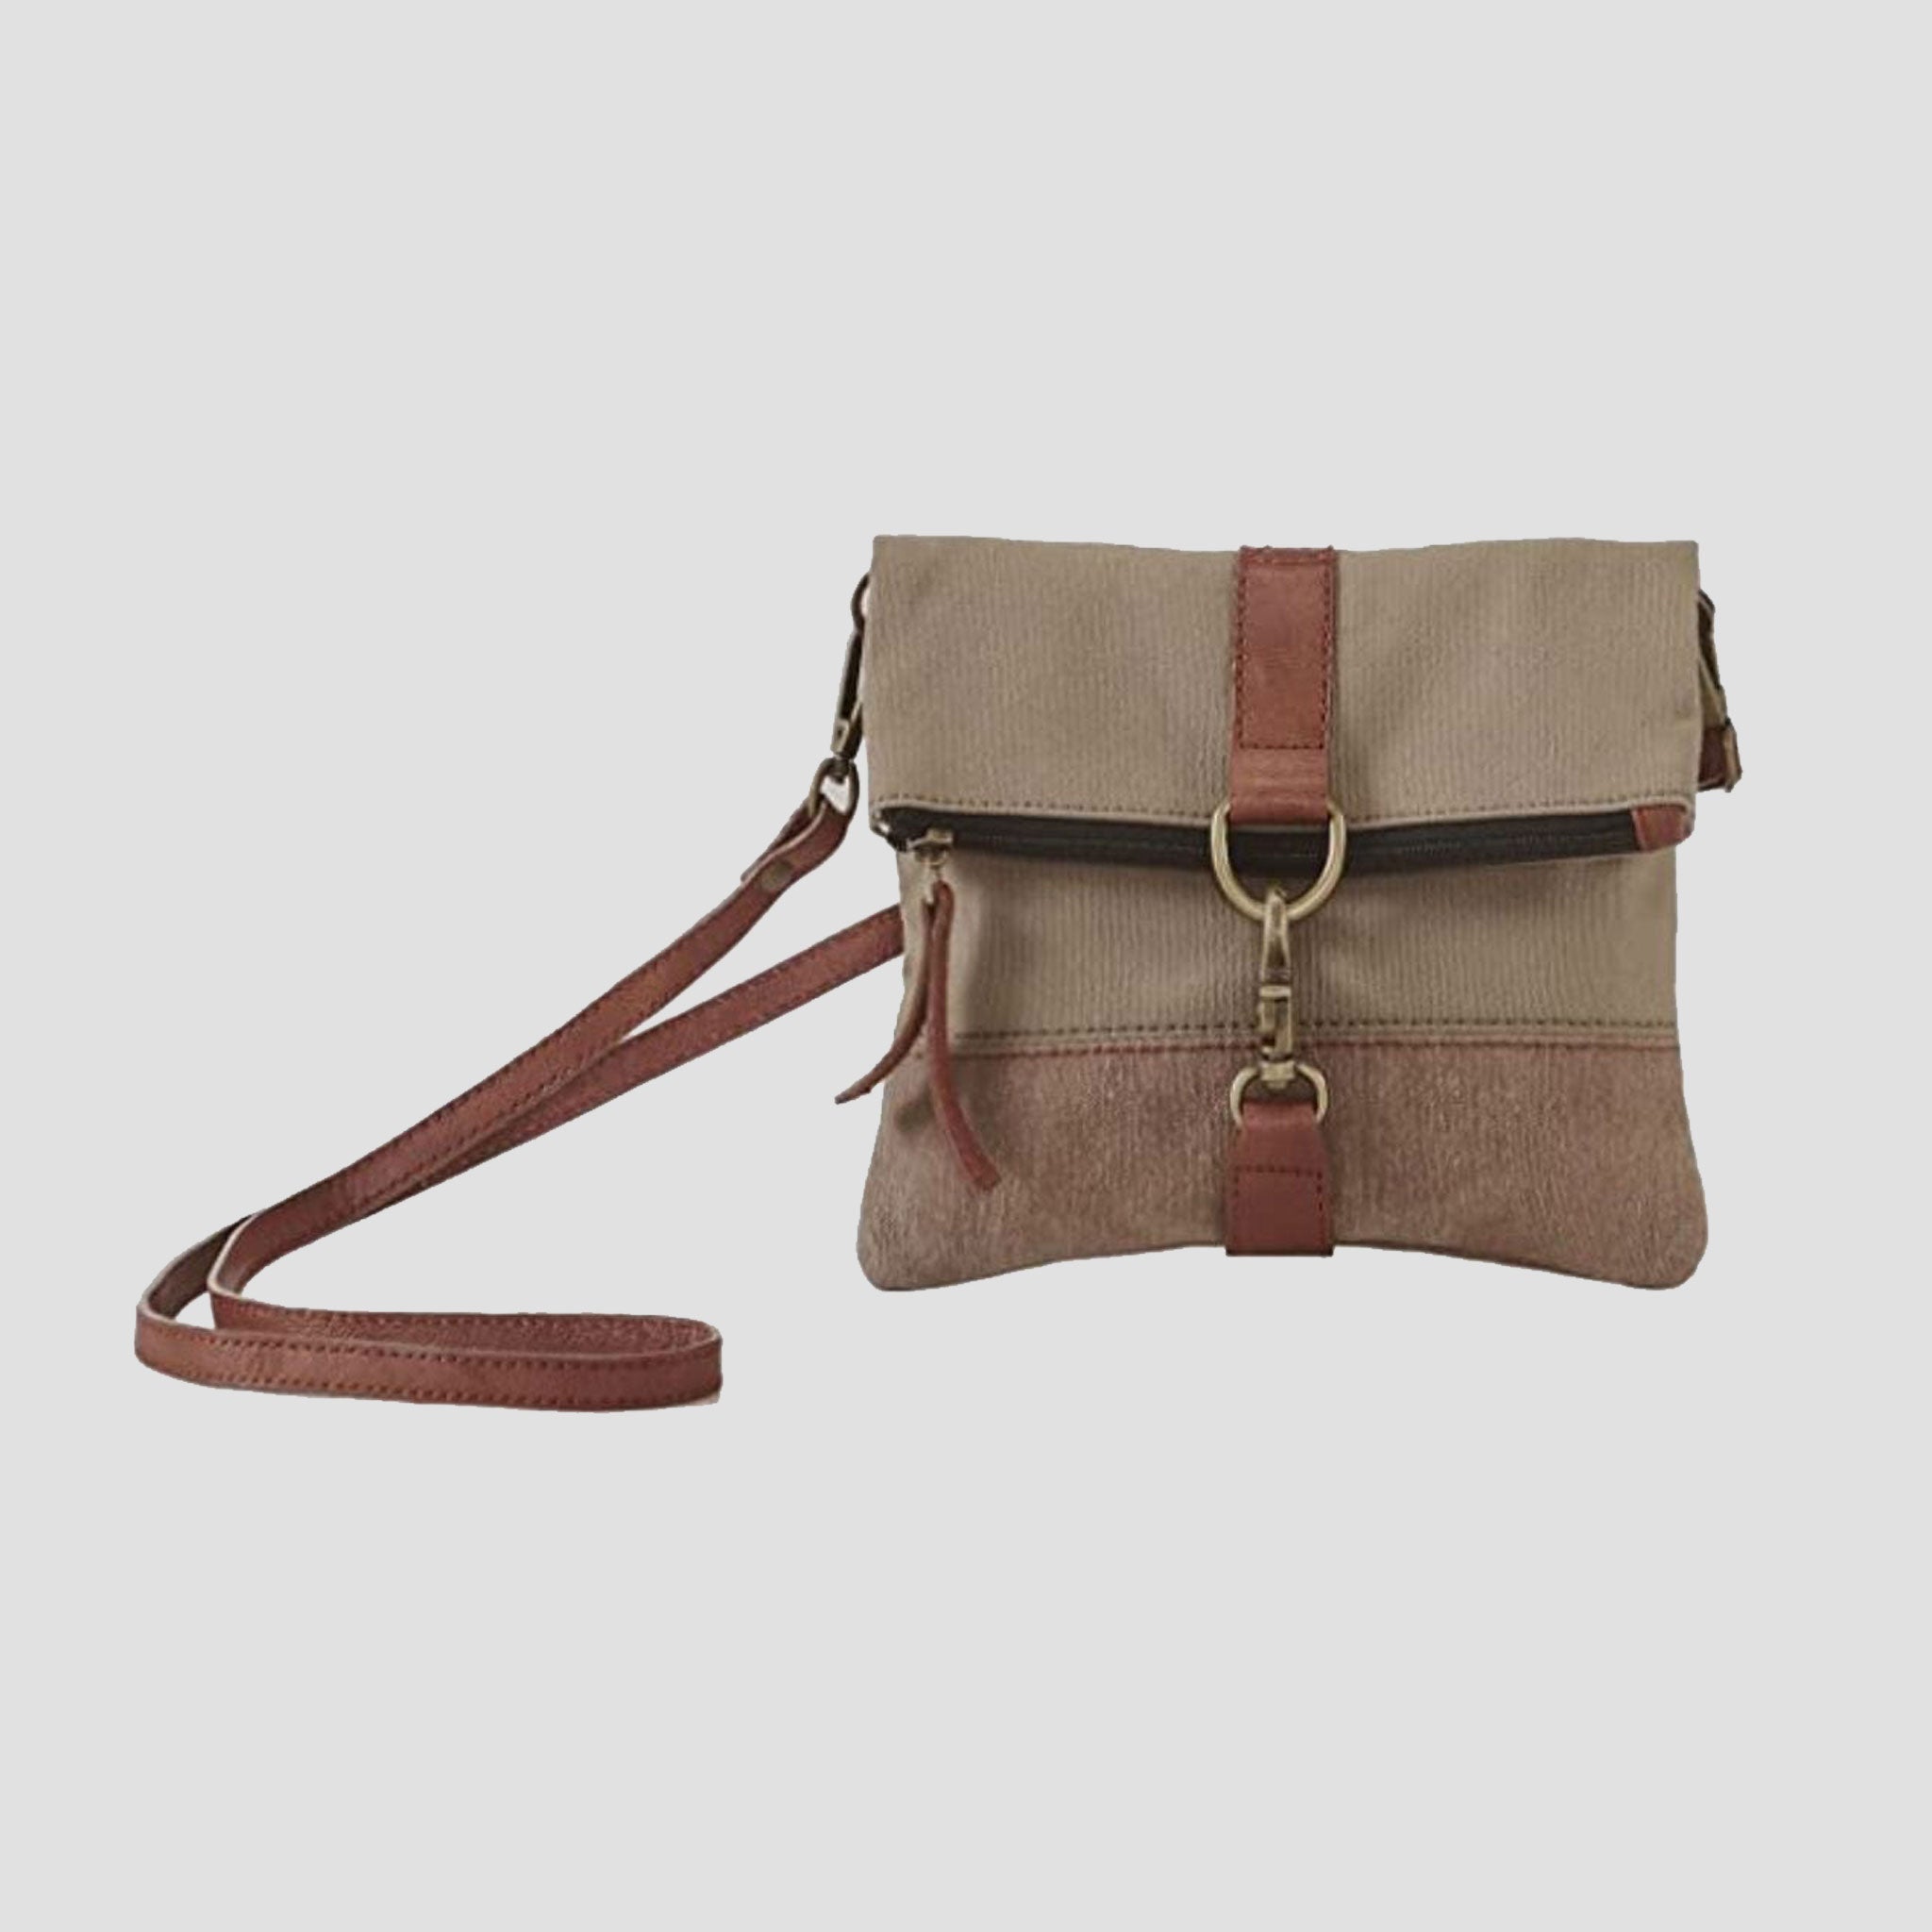 Mona B Finley Canvas Bag Recycled Sling Bag For Women and Girls (Green) - Crossbody Sling Bag by Mona-B - Backpack, EOSS, Flash Sale, Sale, Shop1999, Shop2999, Shop3999